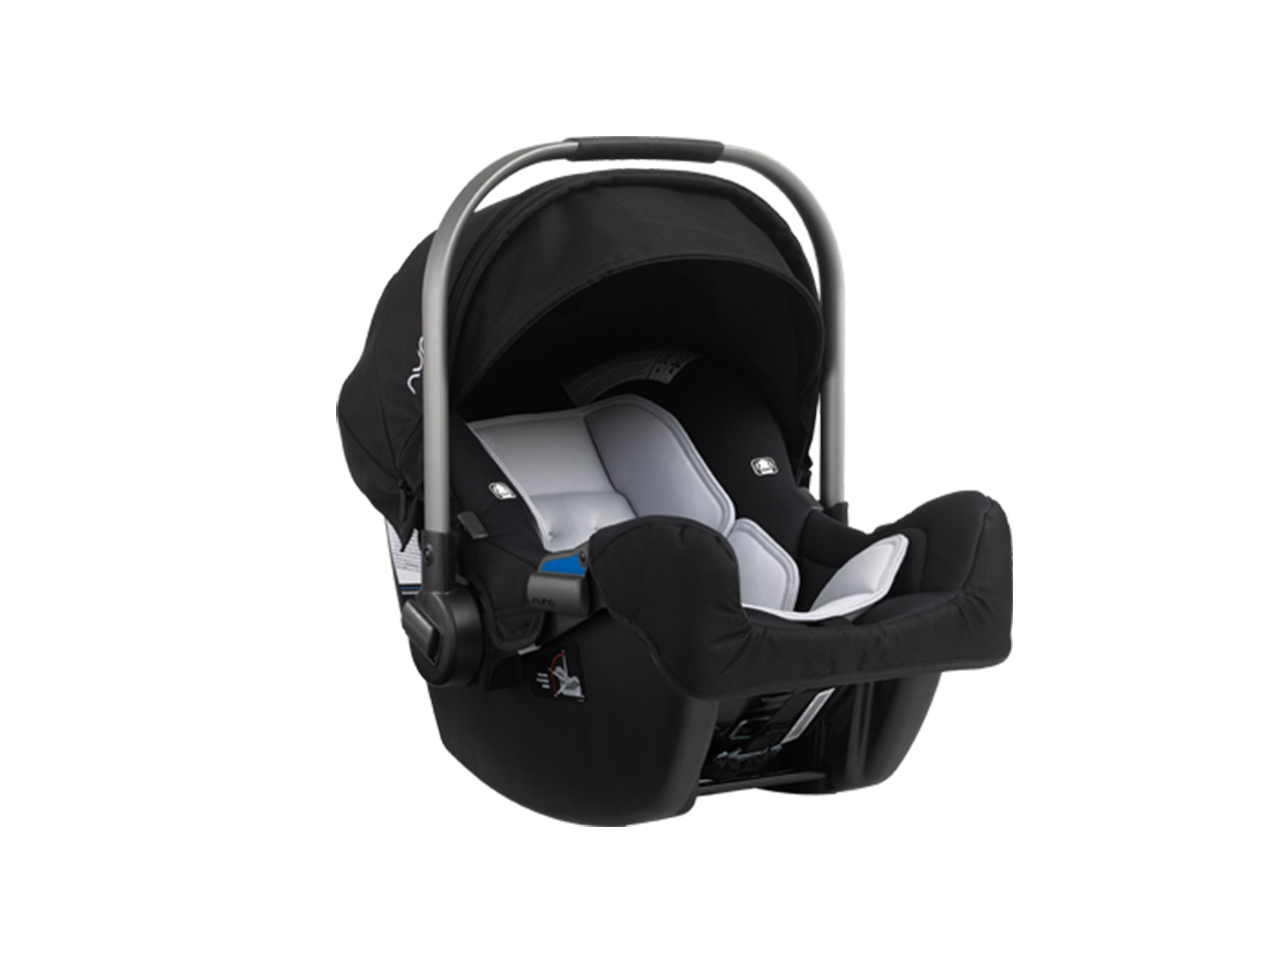 nuna pipa infant car seat safety rating